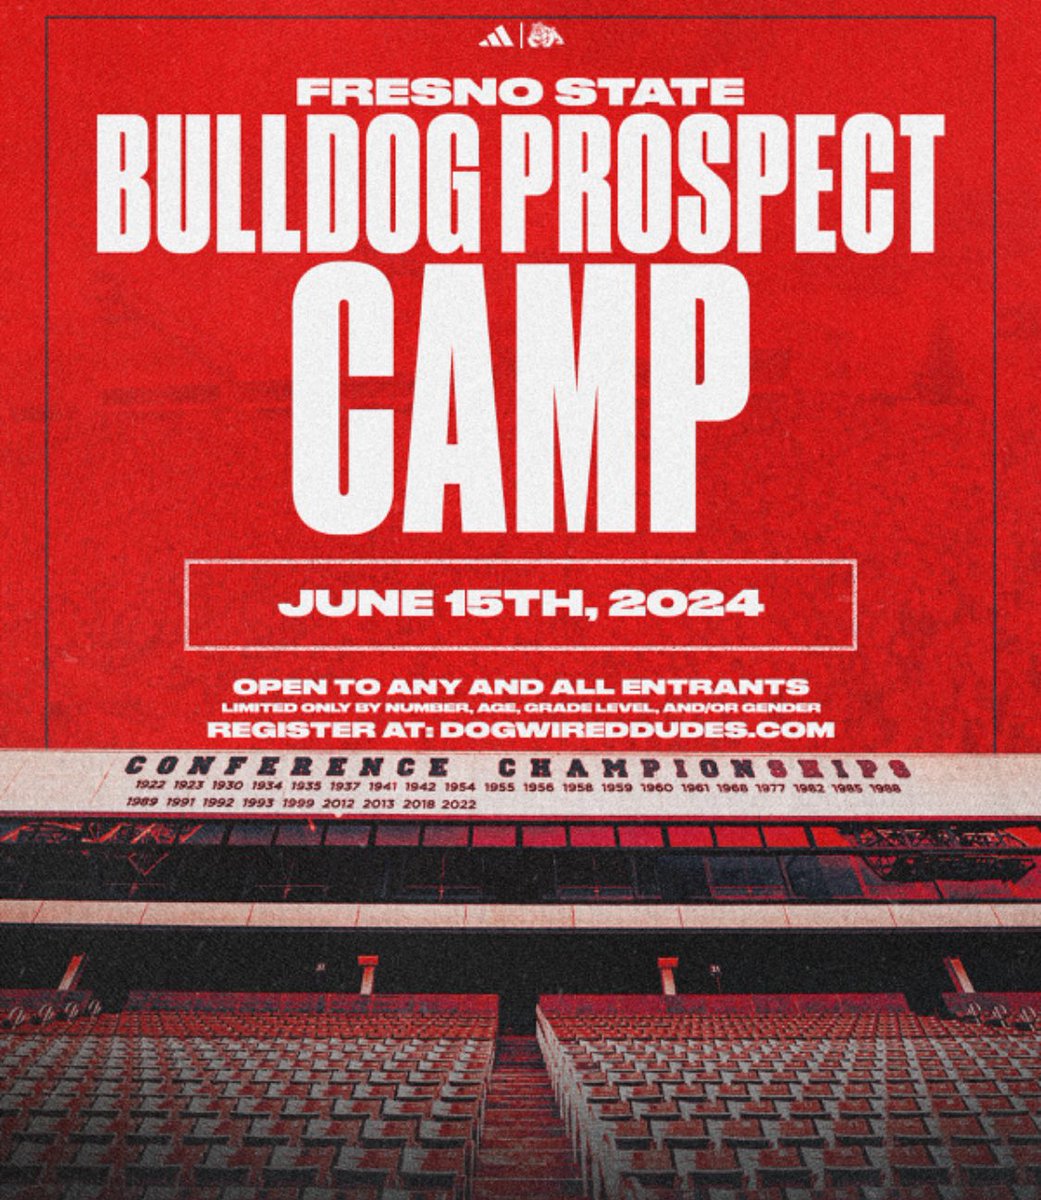 Thank you @jakerasmussen_ for the personal invite to @FresnoStateFB prospect camp this summer! @dogwireddudes @JLottScout @TheUCReport @UTRScouting @On3sports @dhglover @ShaniceTyria1 @youareathlete @WHSFBRecruiting @WakelandFTball @EJHollandOn3 @247Sports @coachbirdwell